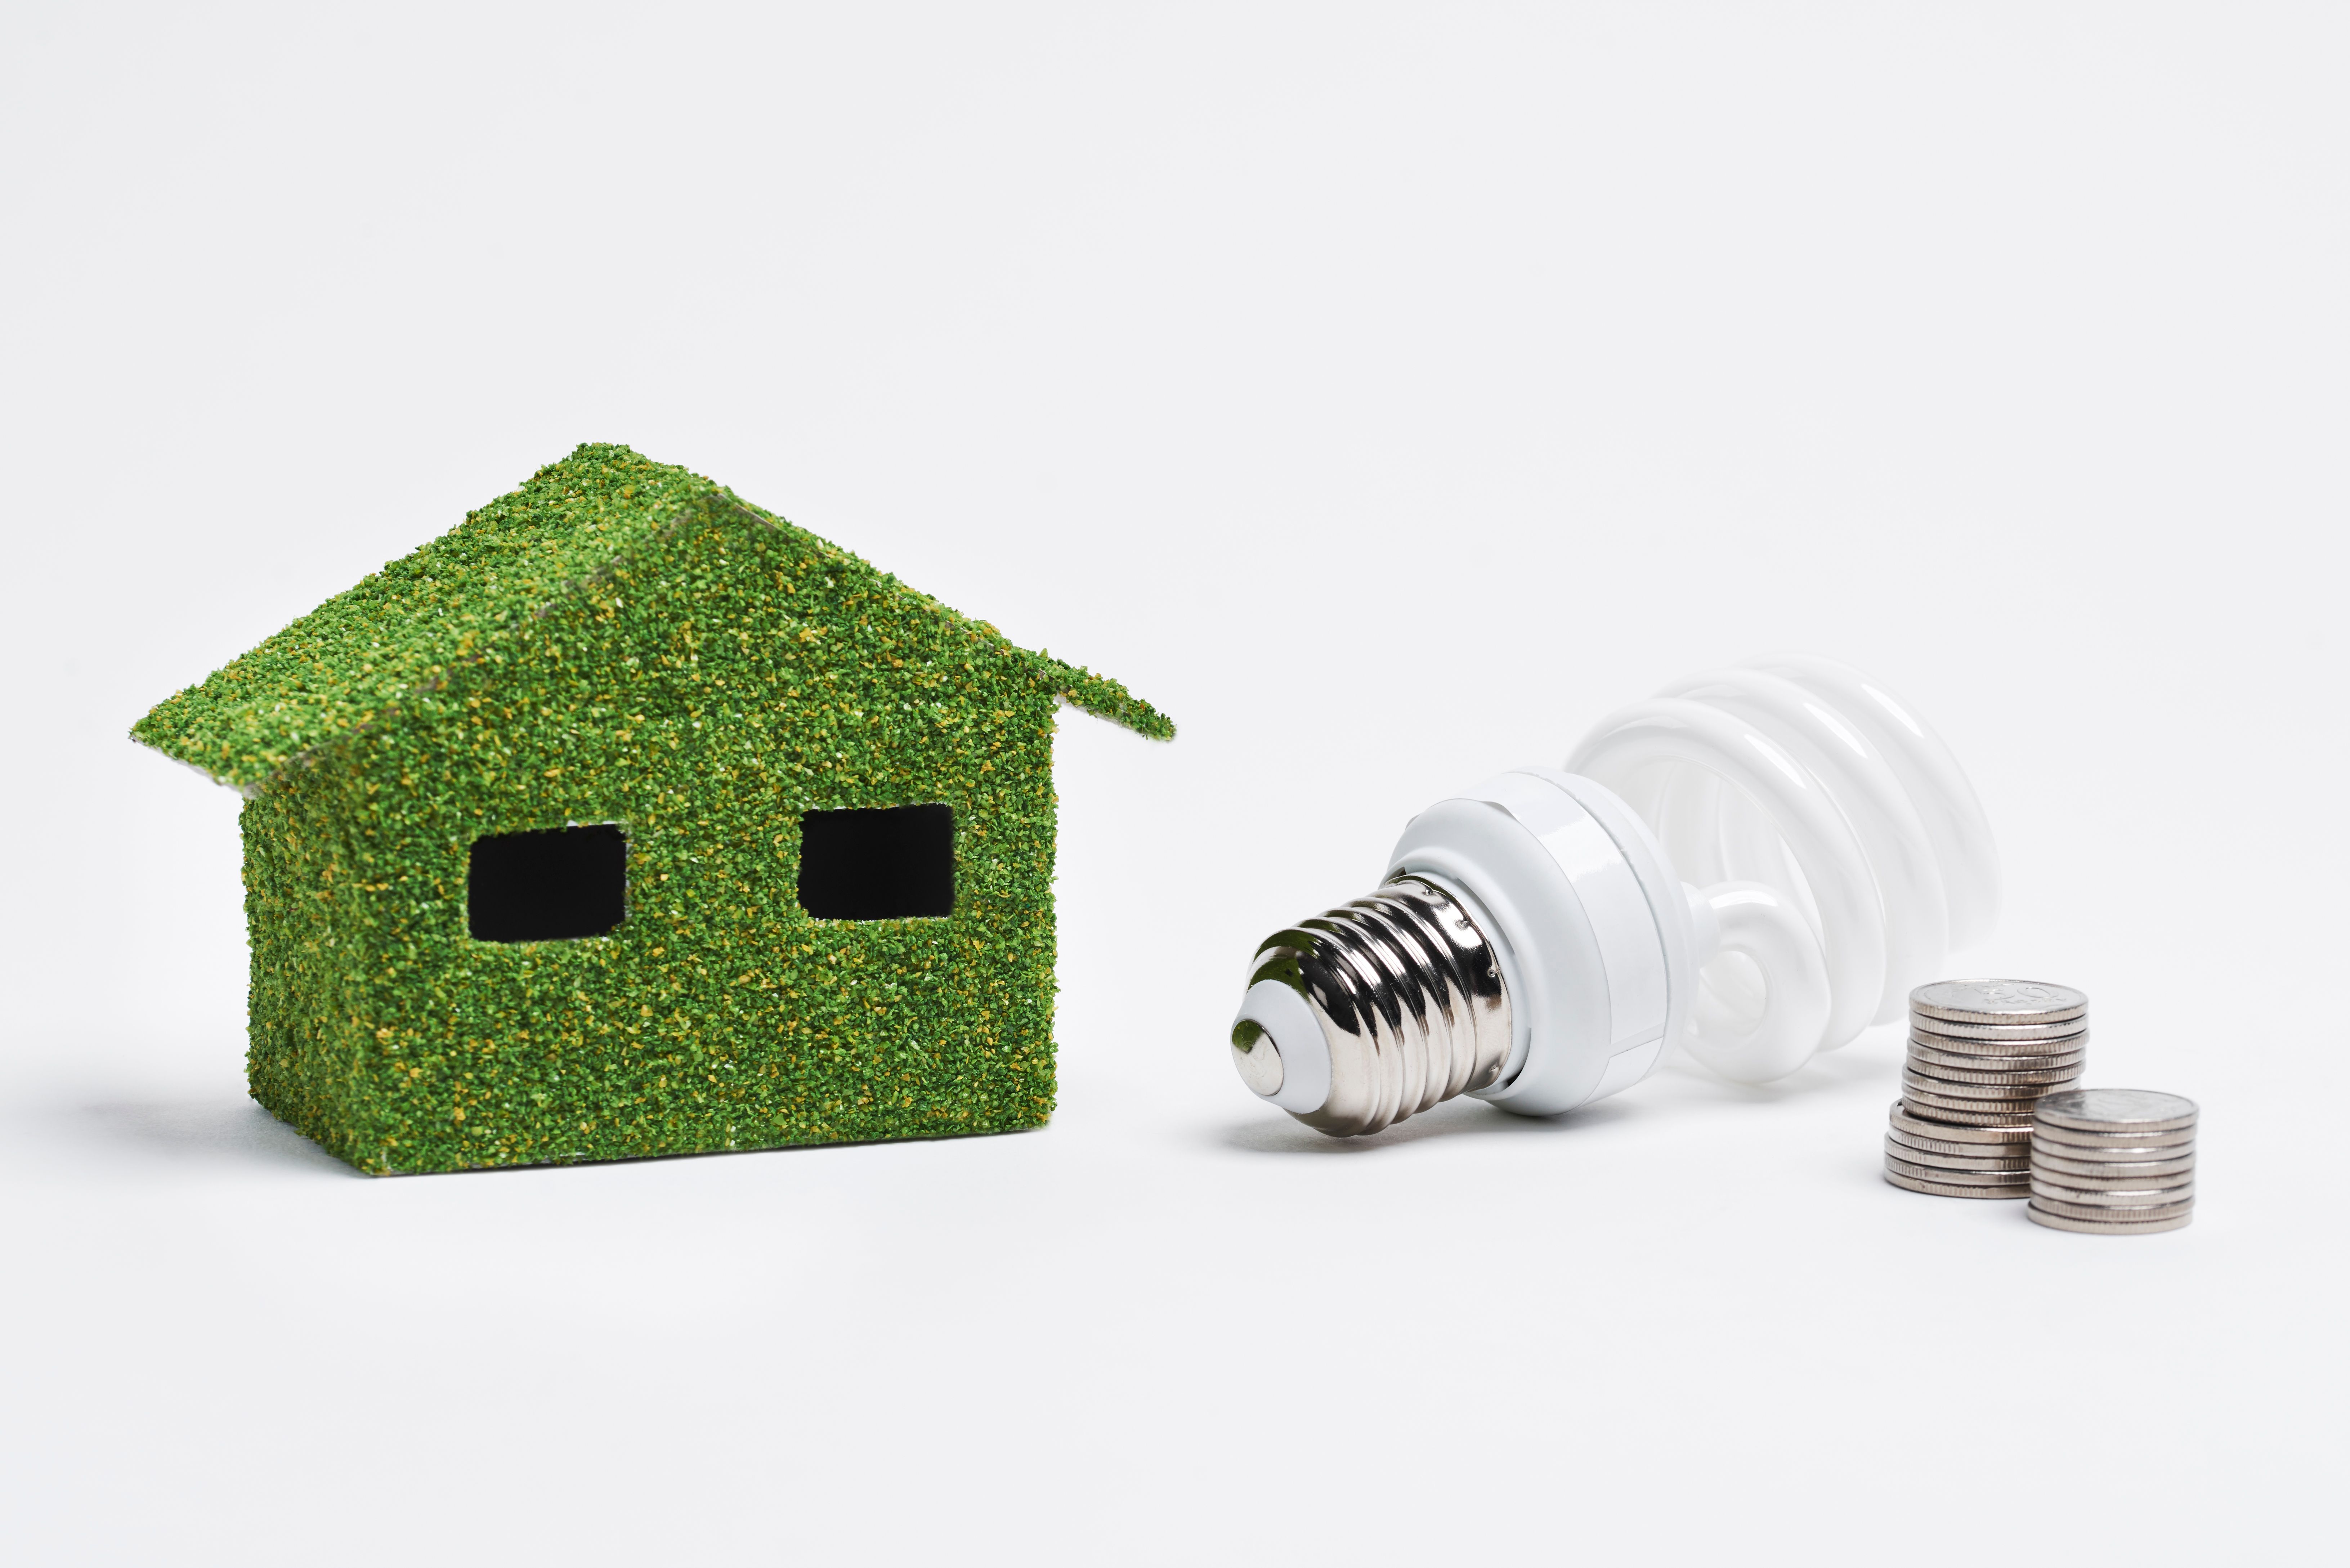 A green home model next to an energy-saving light bulb and 2 stacks of coins.